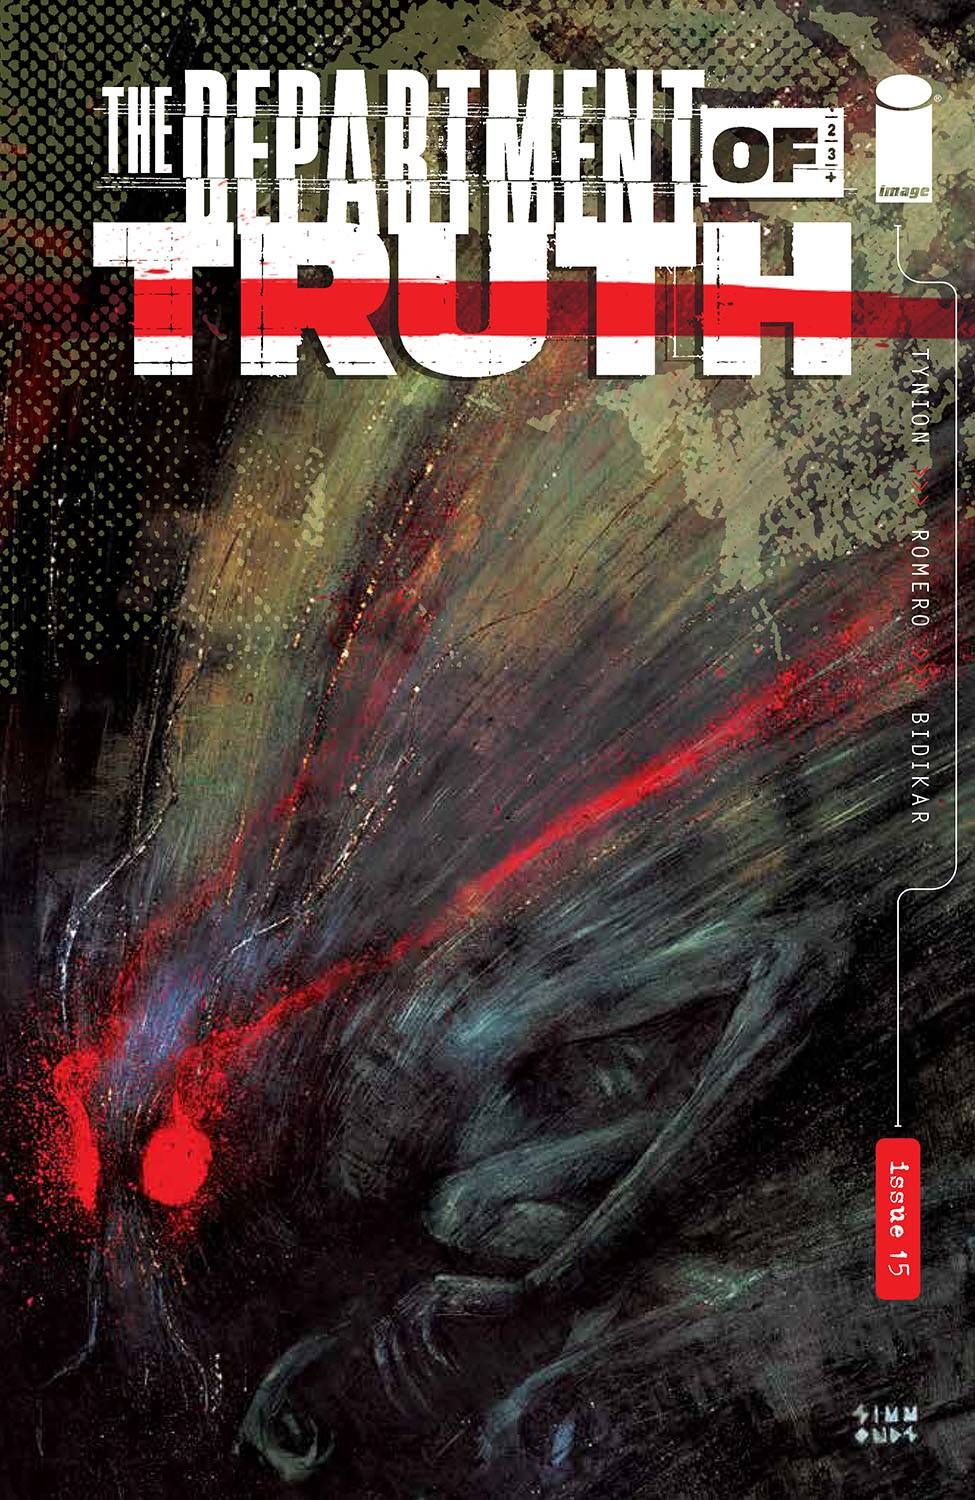 Department Of Truth #15 Comic